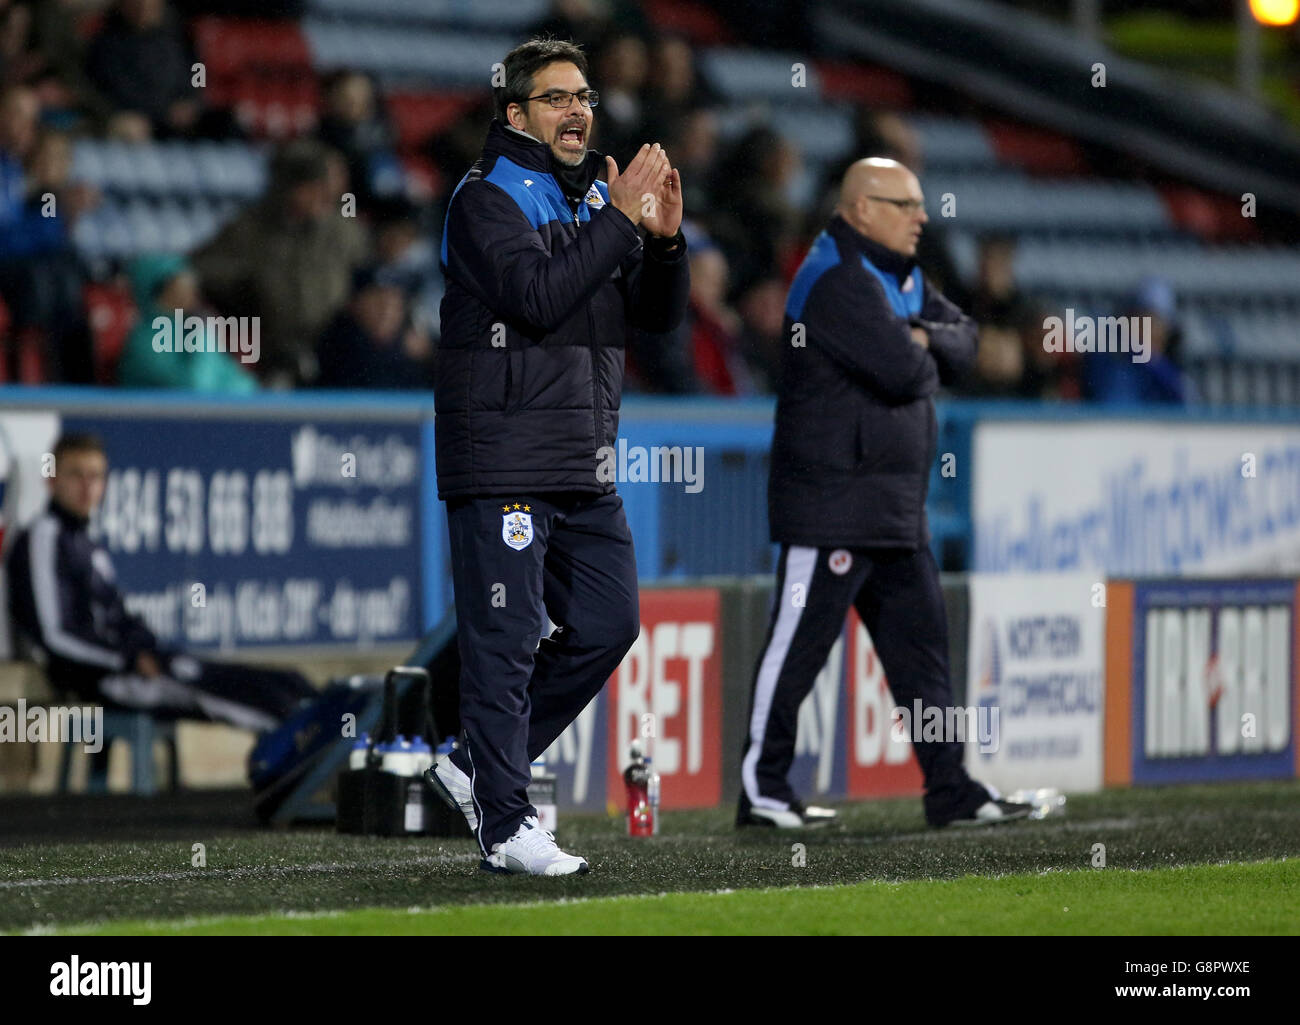 Huddersfield Town v Reading - Sky Bet Championship - John Smith's Stadium. Huddersfield Town manager David Wagner and Reading manager Brian McDermott on the touchline Stock Photo